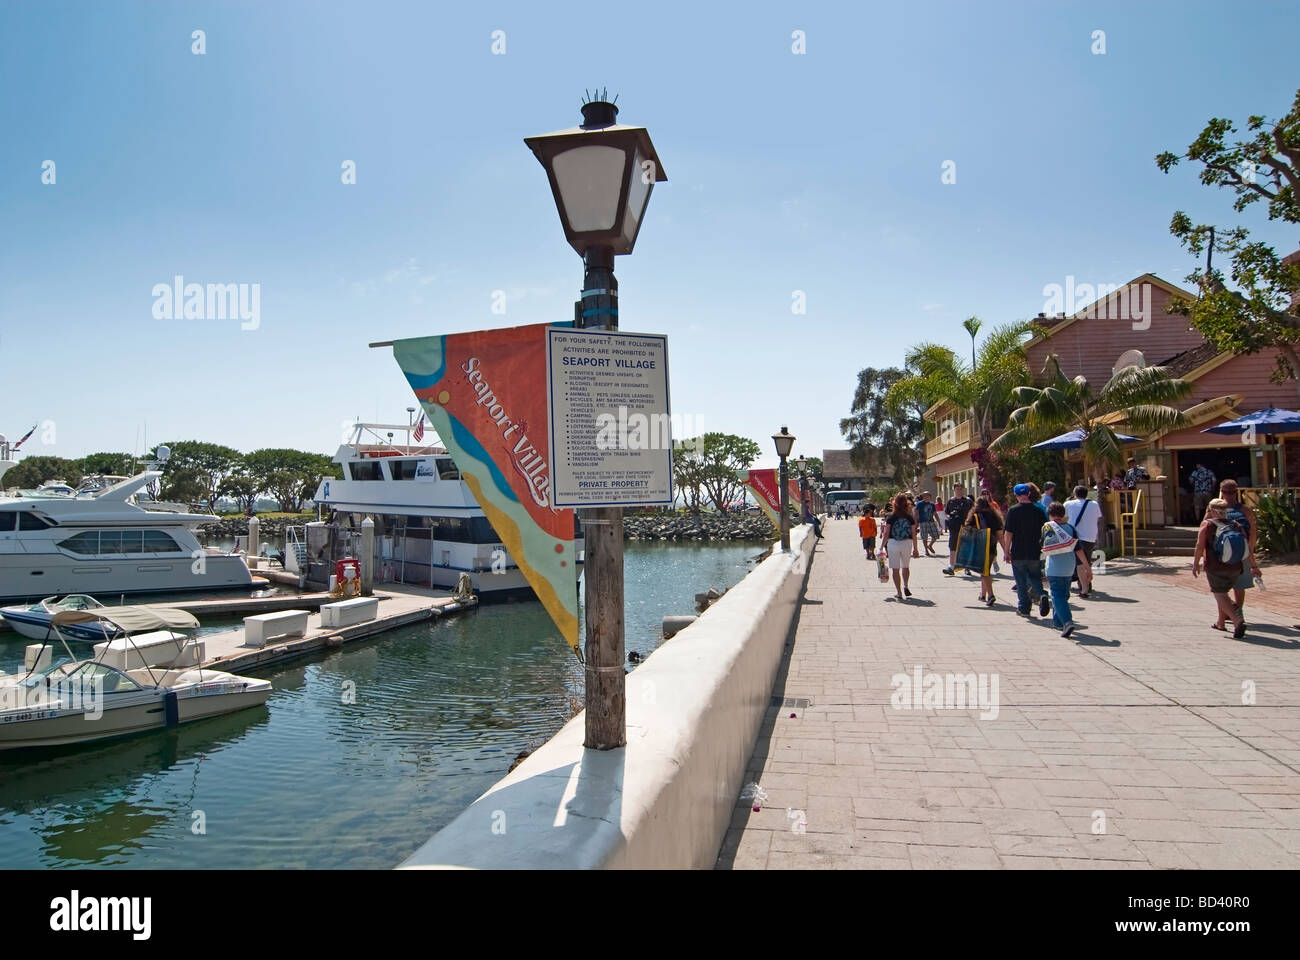 Seaport Village is a shopping and dining complex overlooking the bay in San Diego, California. Stock Photo